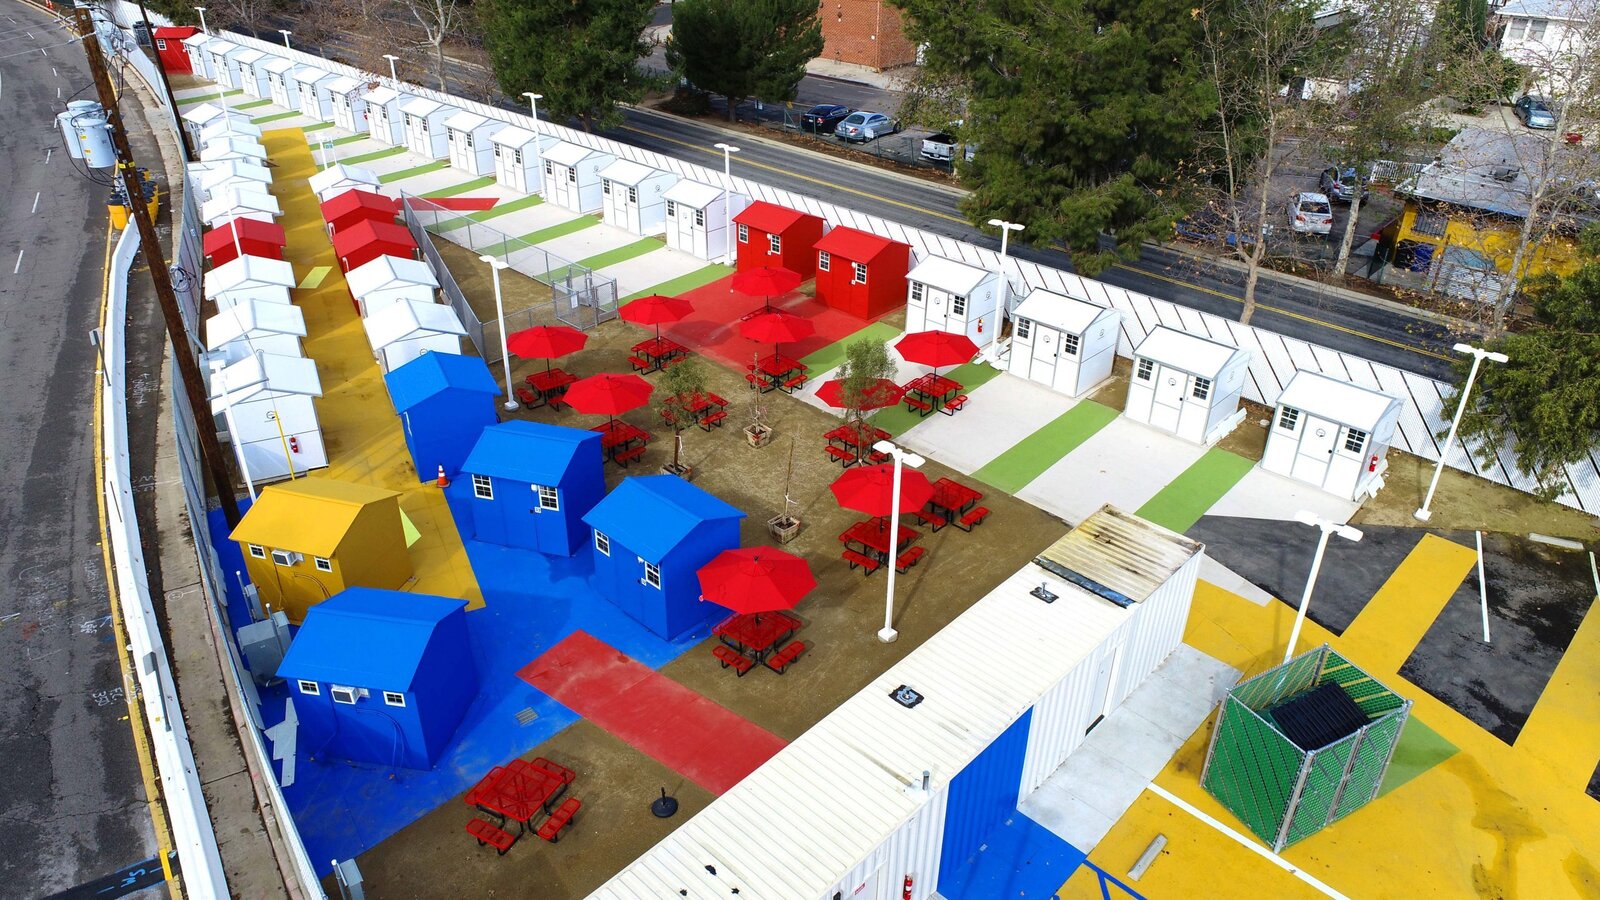 L.A. Is Taking On Homelessness With a New, Brightly Colored Tiny Home Village